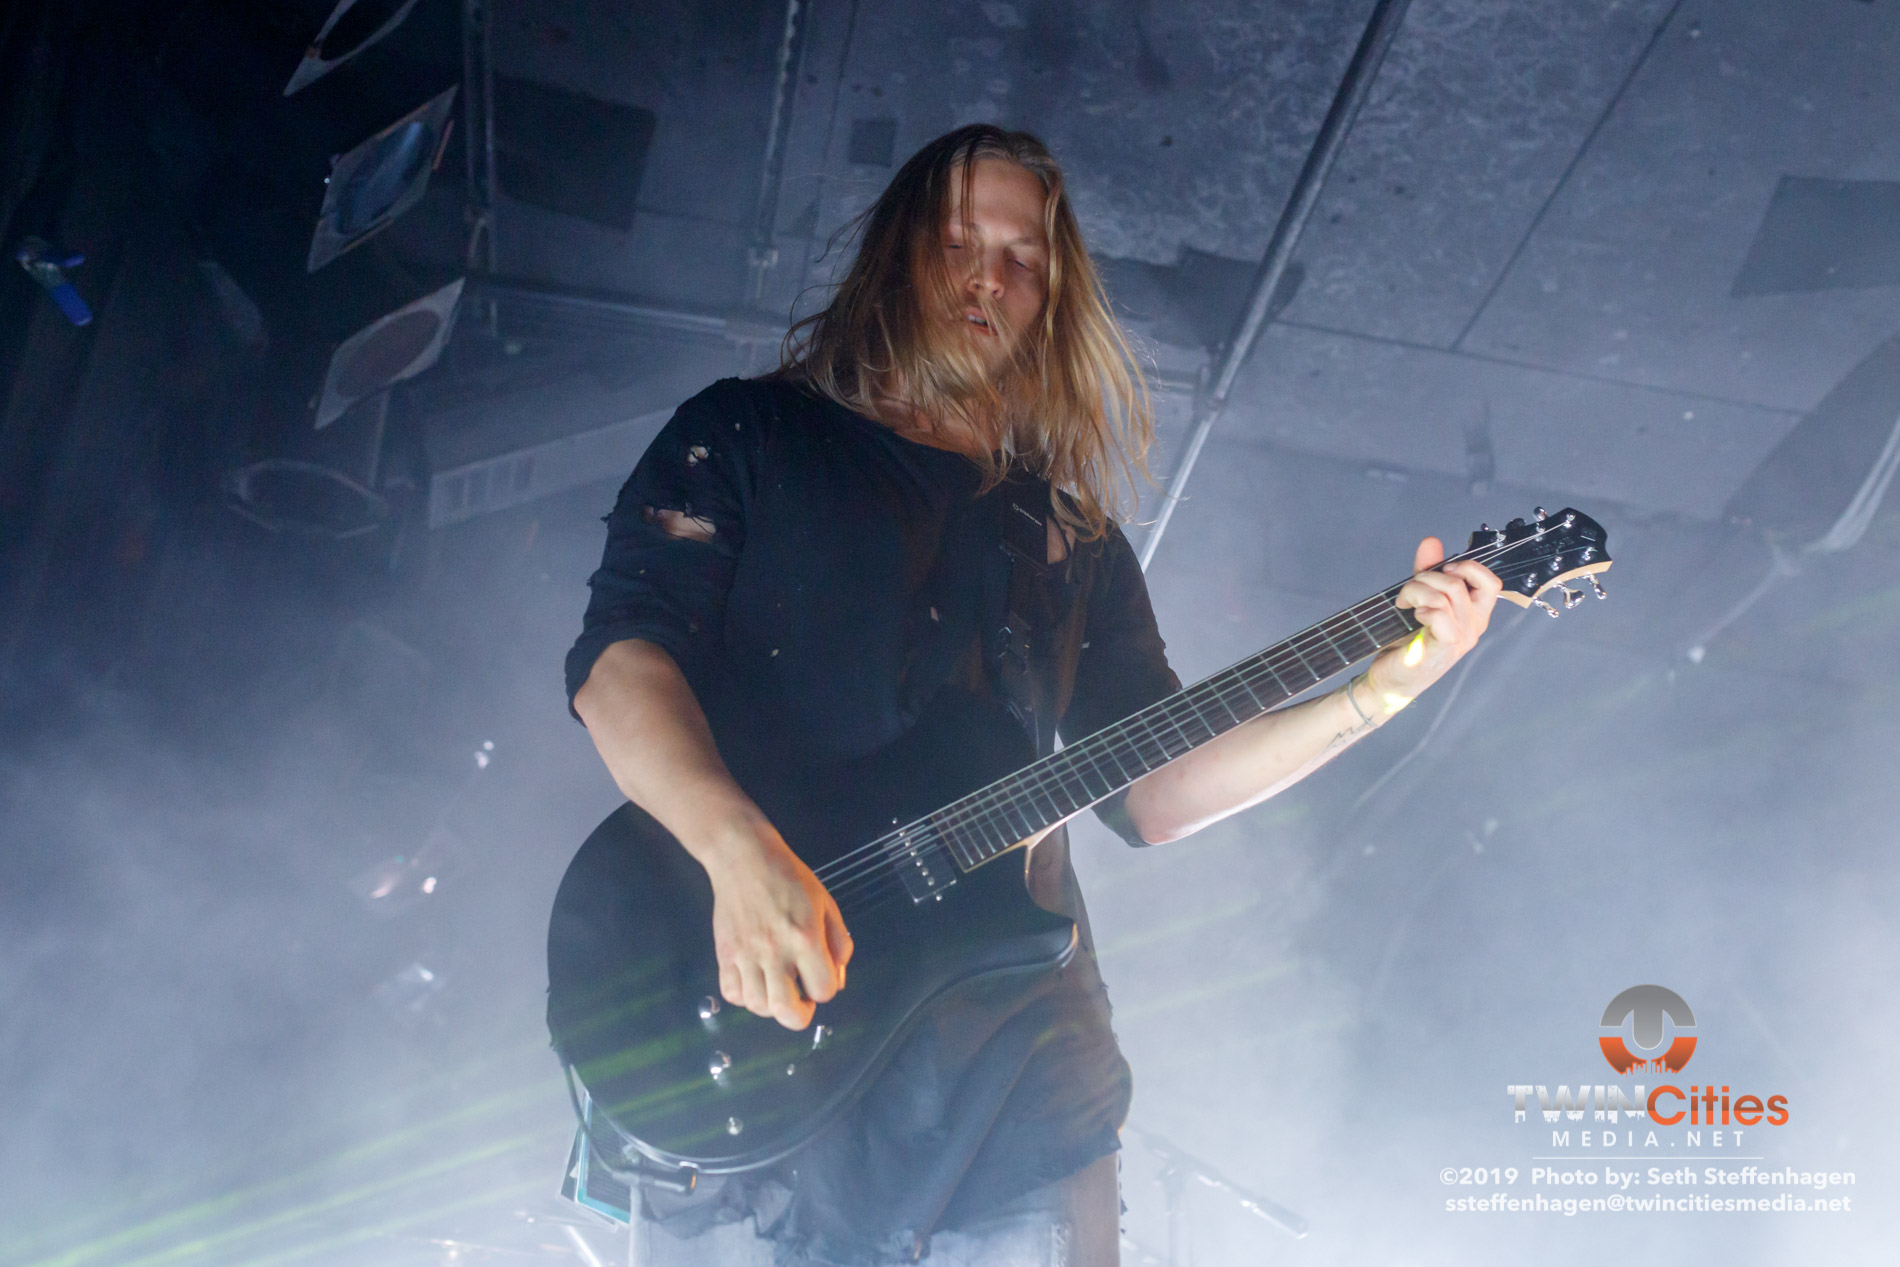 October 5, 2019 - Minneapolis, Minnesota, United States -  Eluveitie live in concert at The Cabooze co-headlining with Korpiklaani and with Gone In April as the openers.

(Photo by Seth Steffenhagen/Steffenhagen Photography)